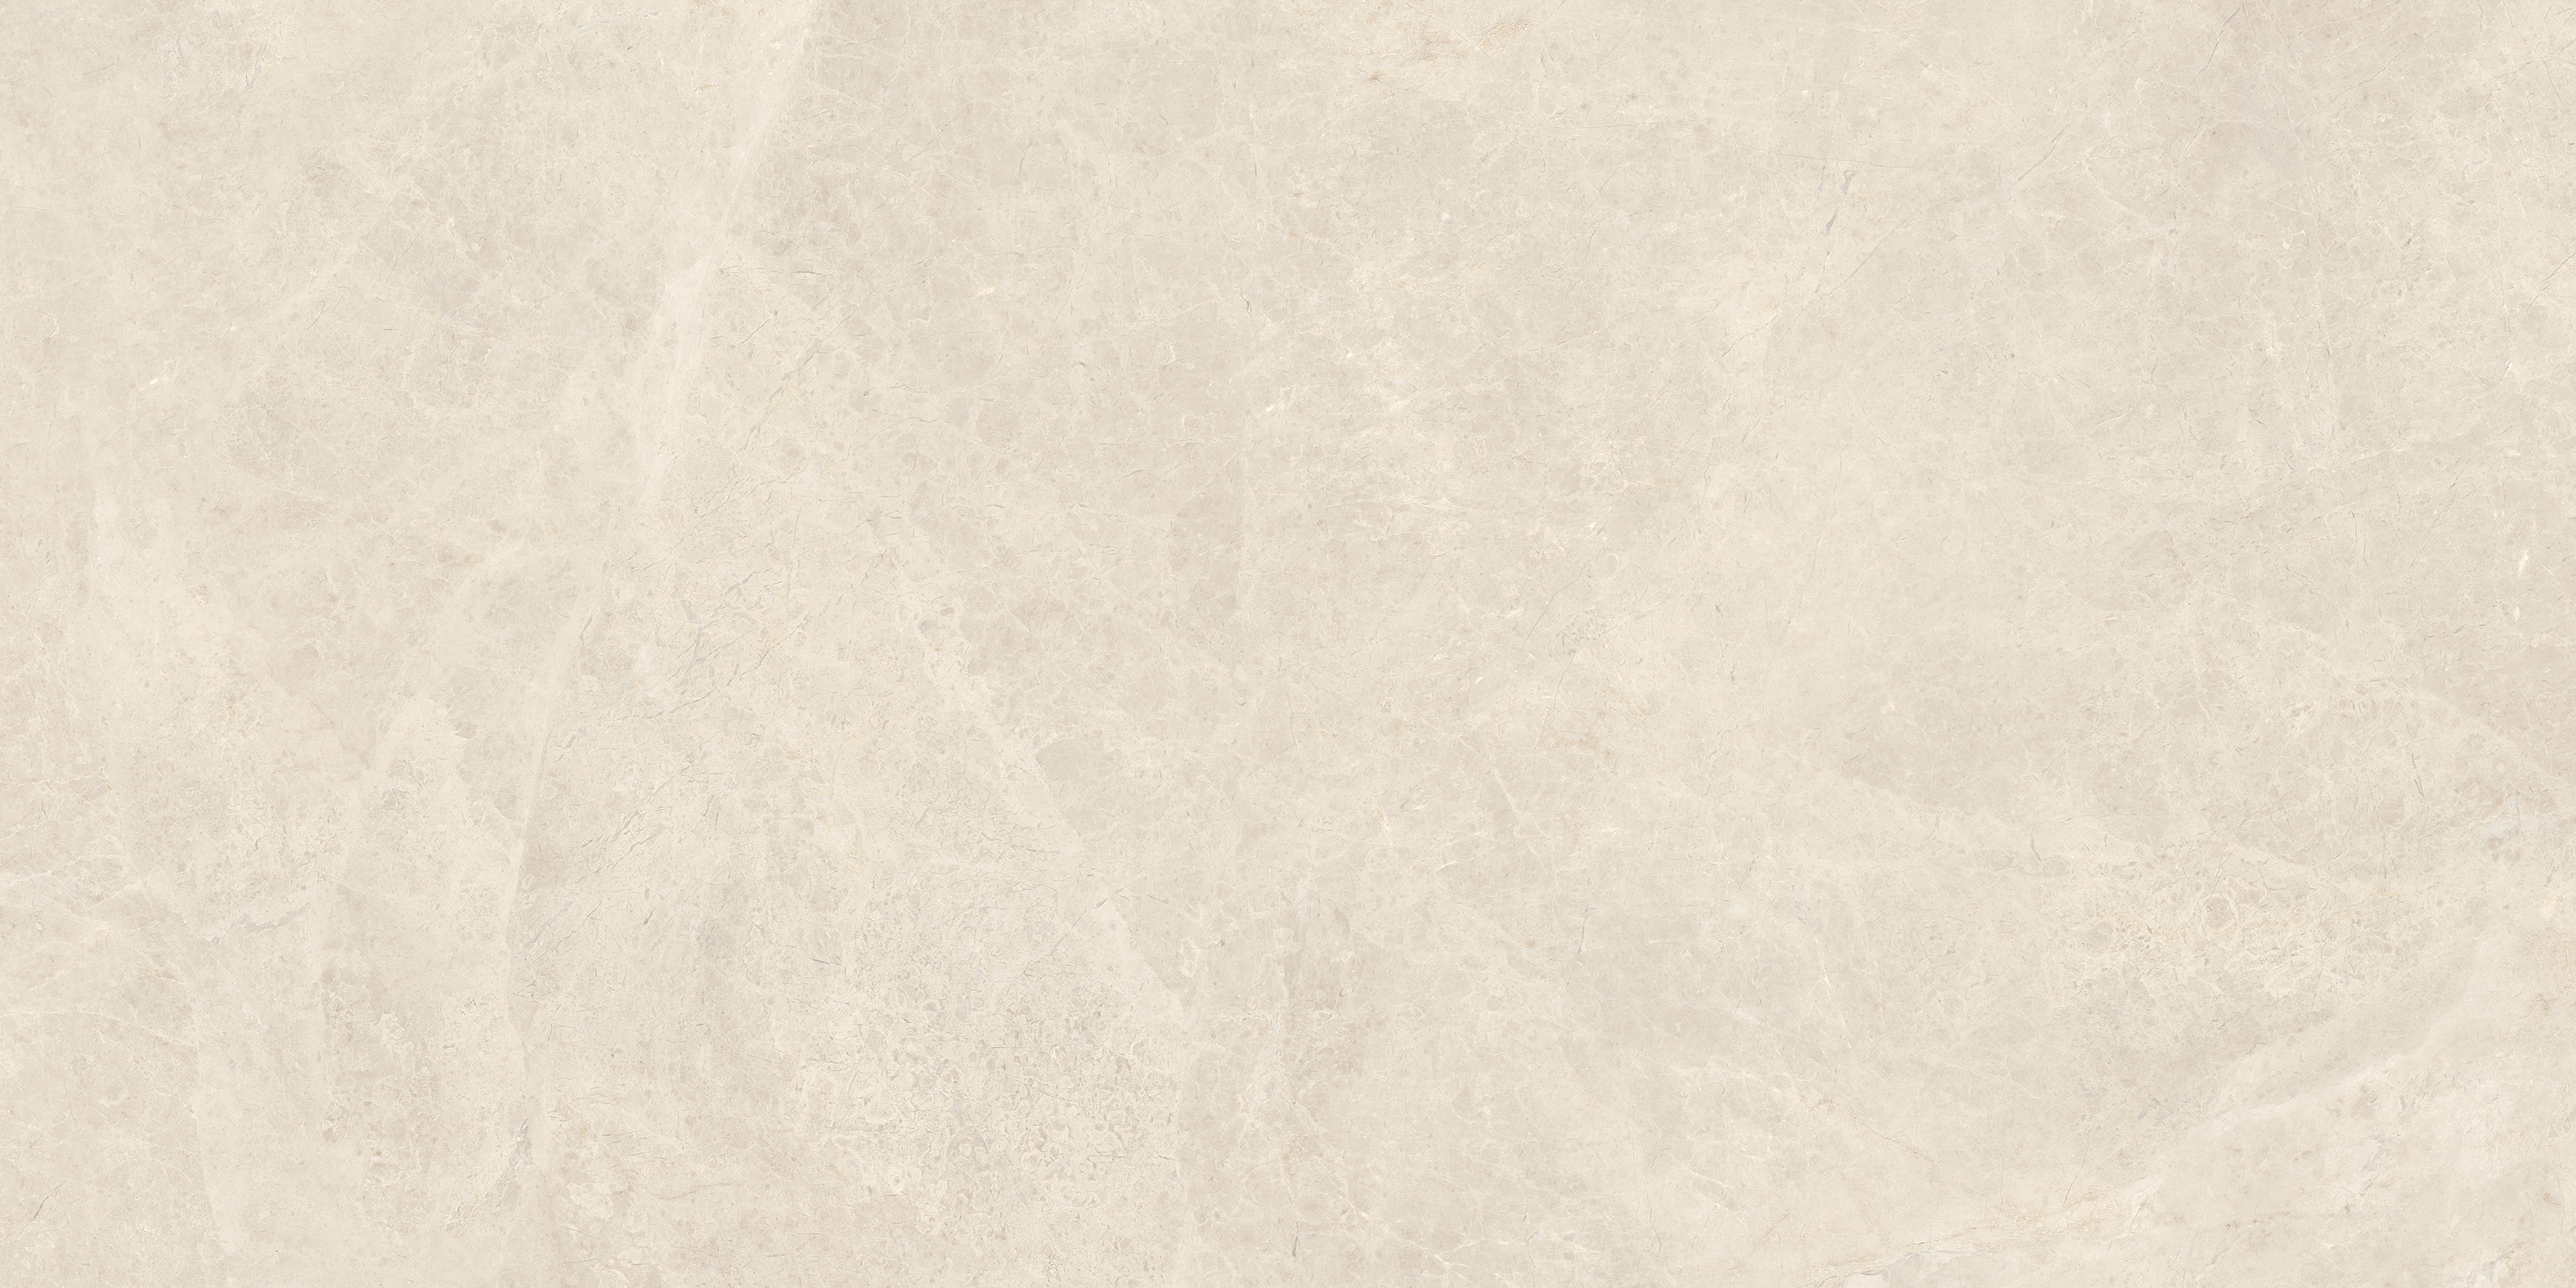 allure ivory pattern glazed porcelain field tile from mayfair anatolia collection distributed by surface group international matte finish rectified edge 16x32 rectangle shape